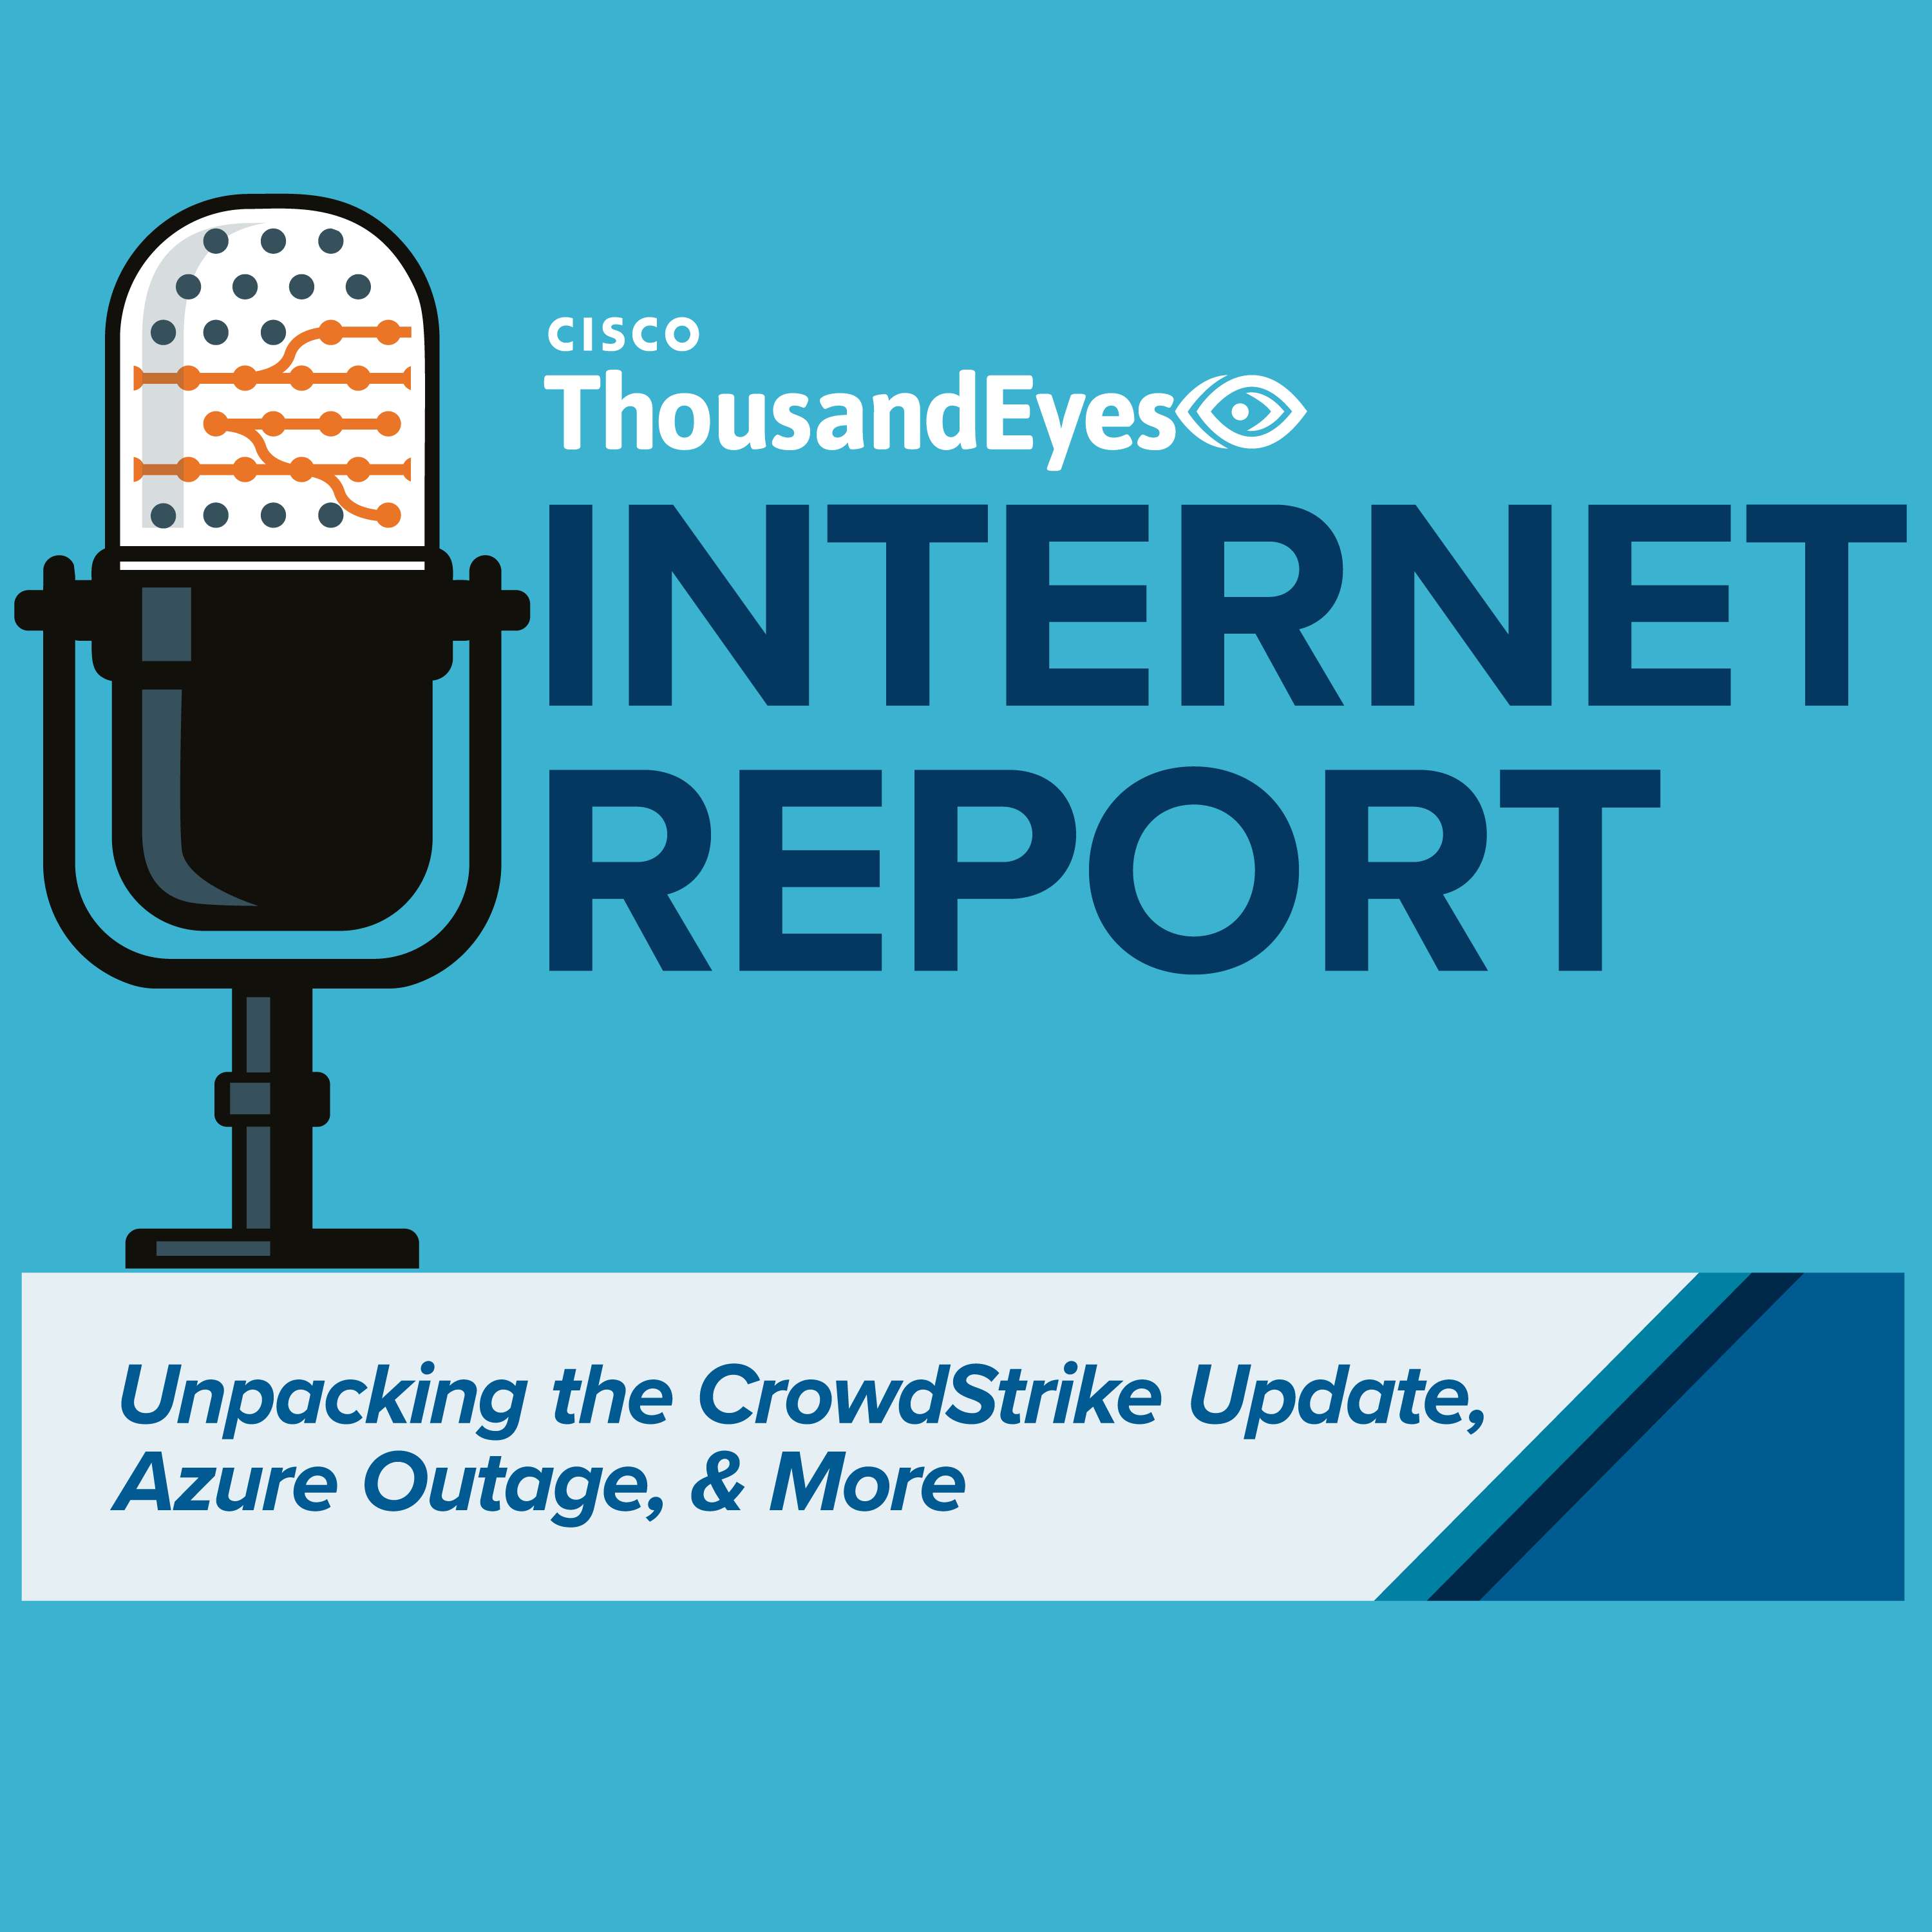 Unpacking the CrowdStrike Update, Azure Outage, & More